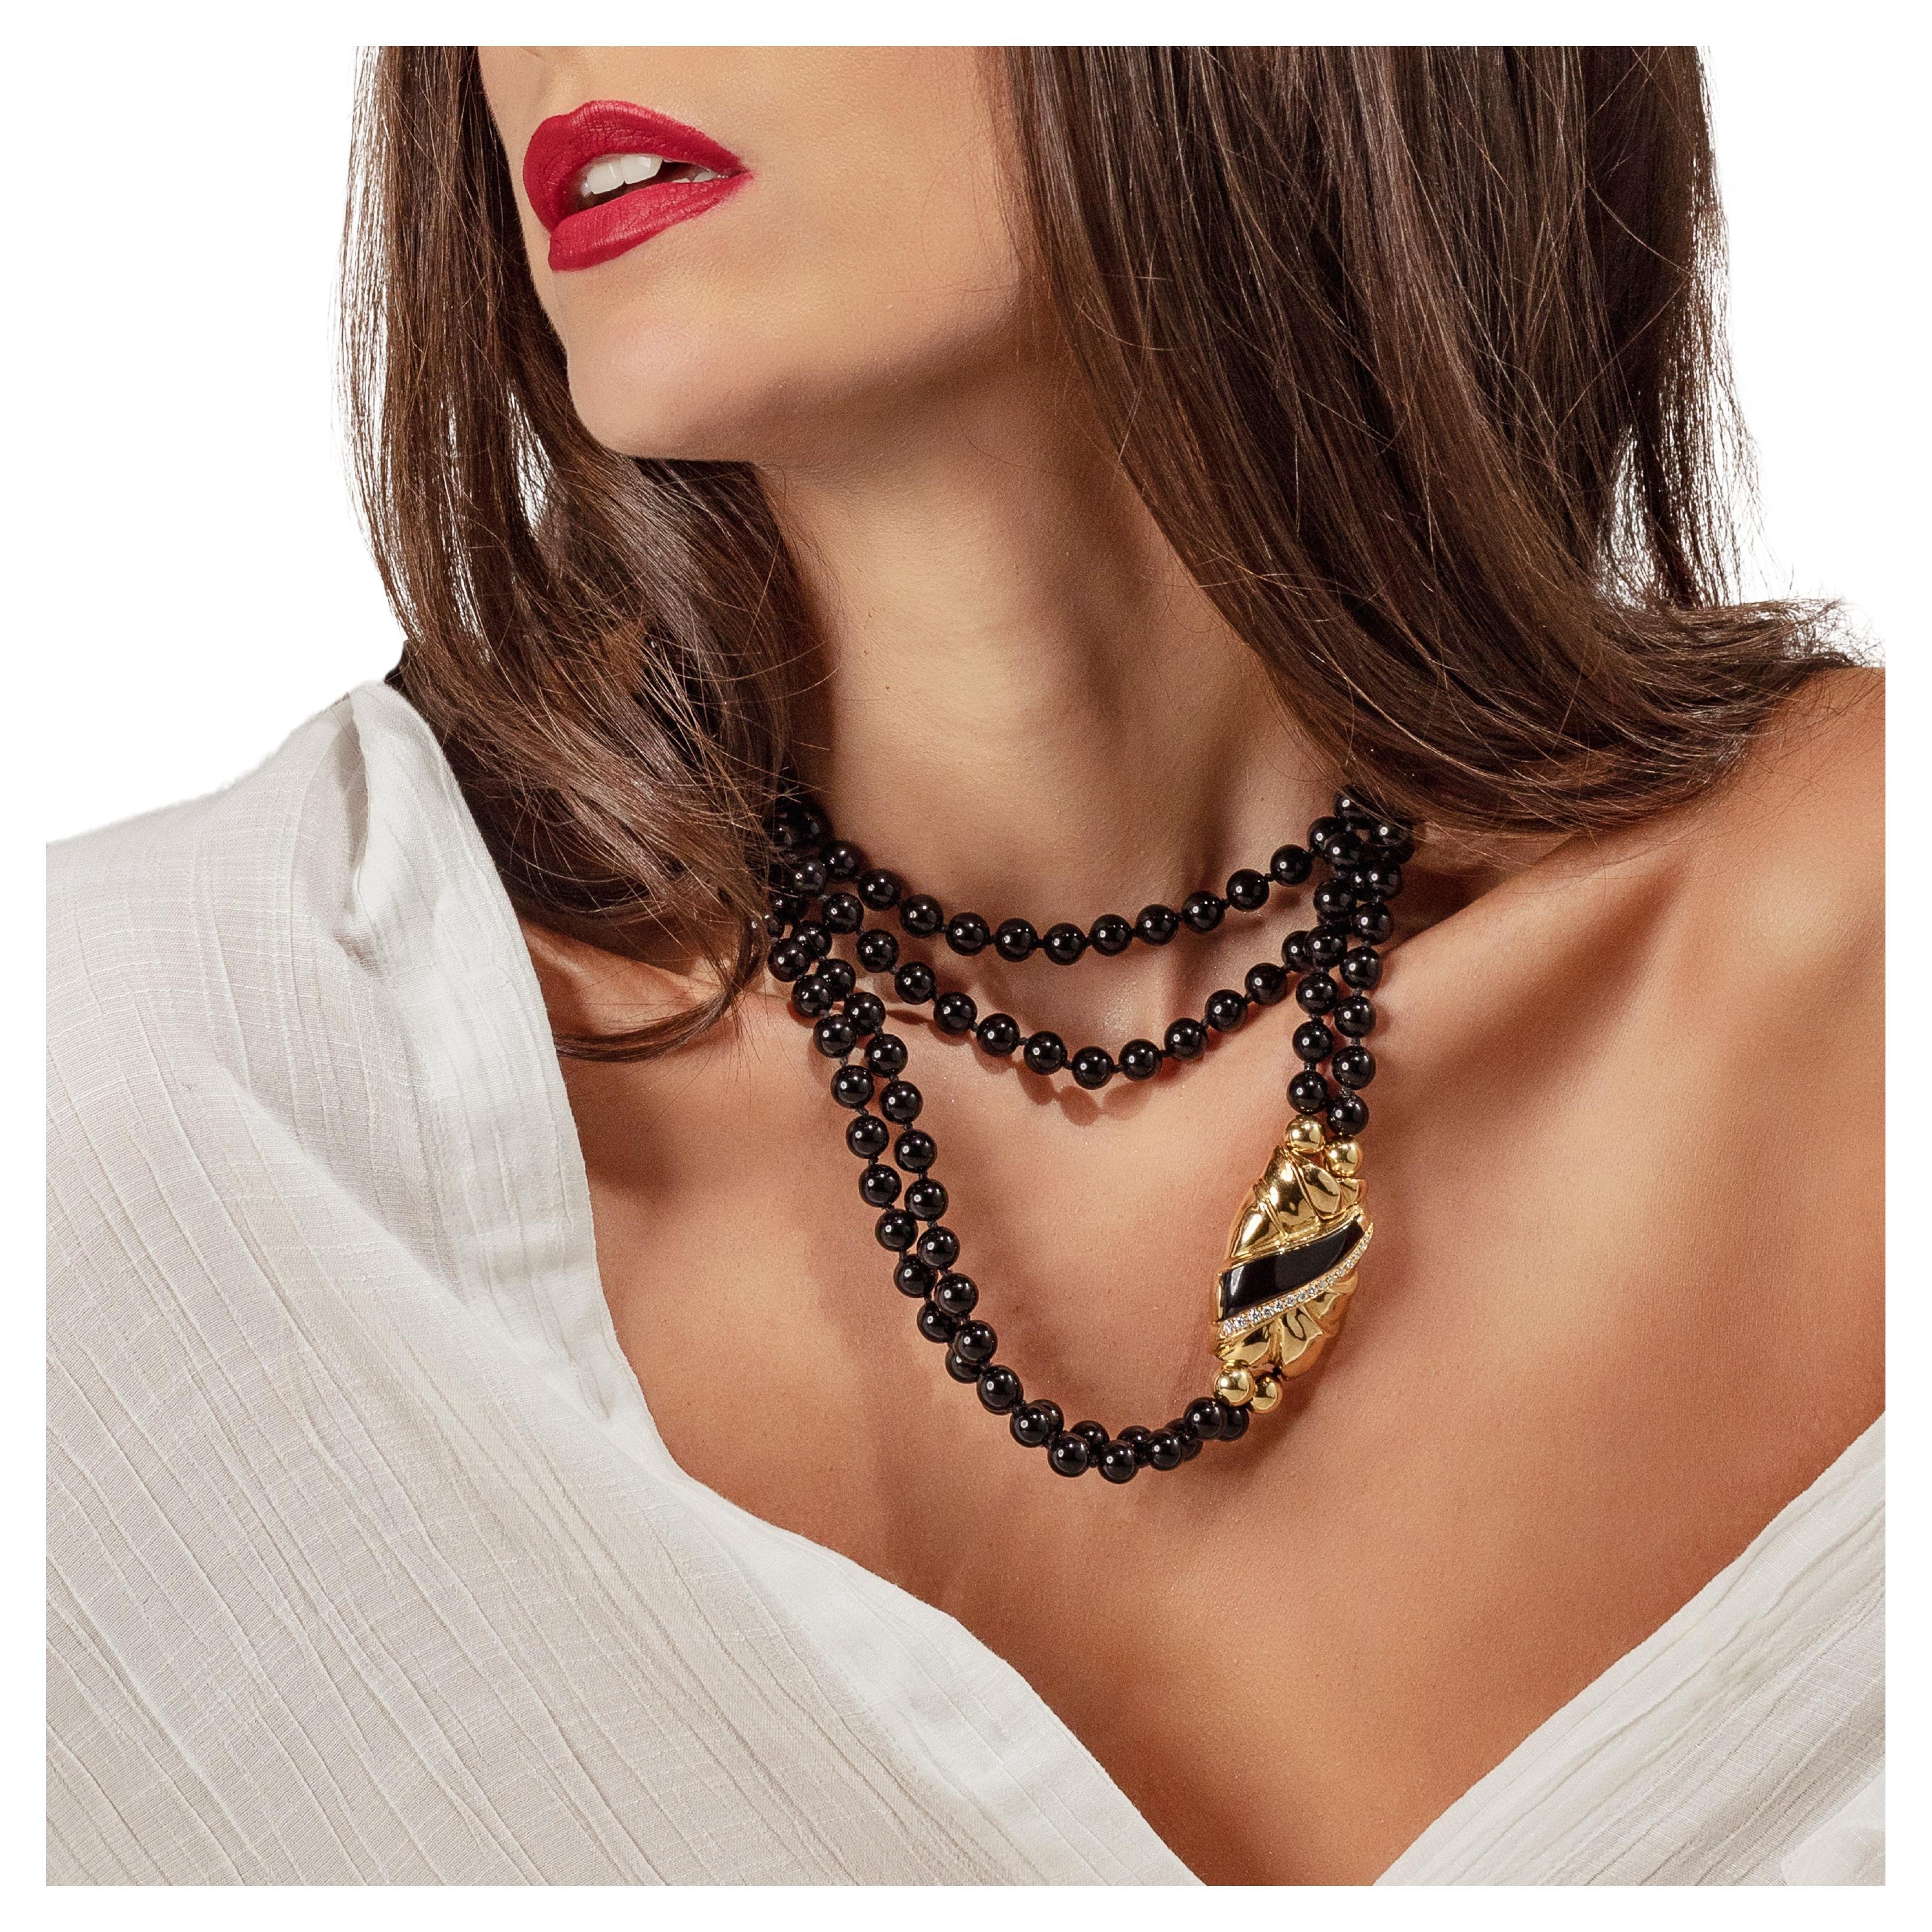 Double-Strand Black Onyx Beaded Necklace With 18ct Gold Clasp